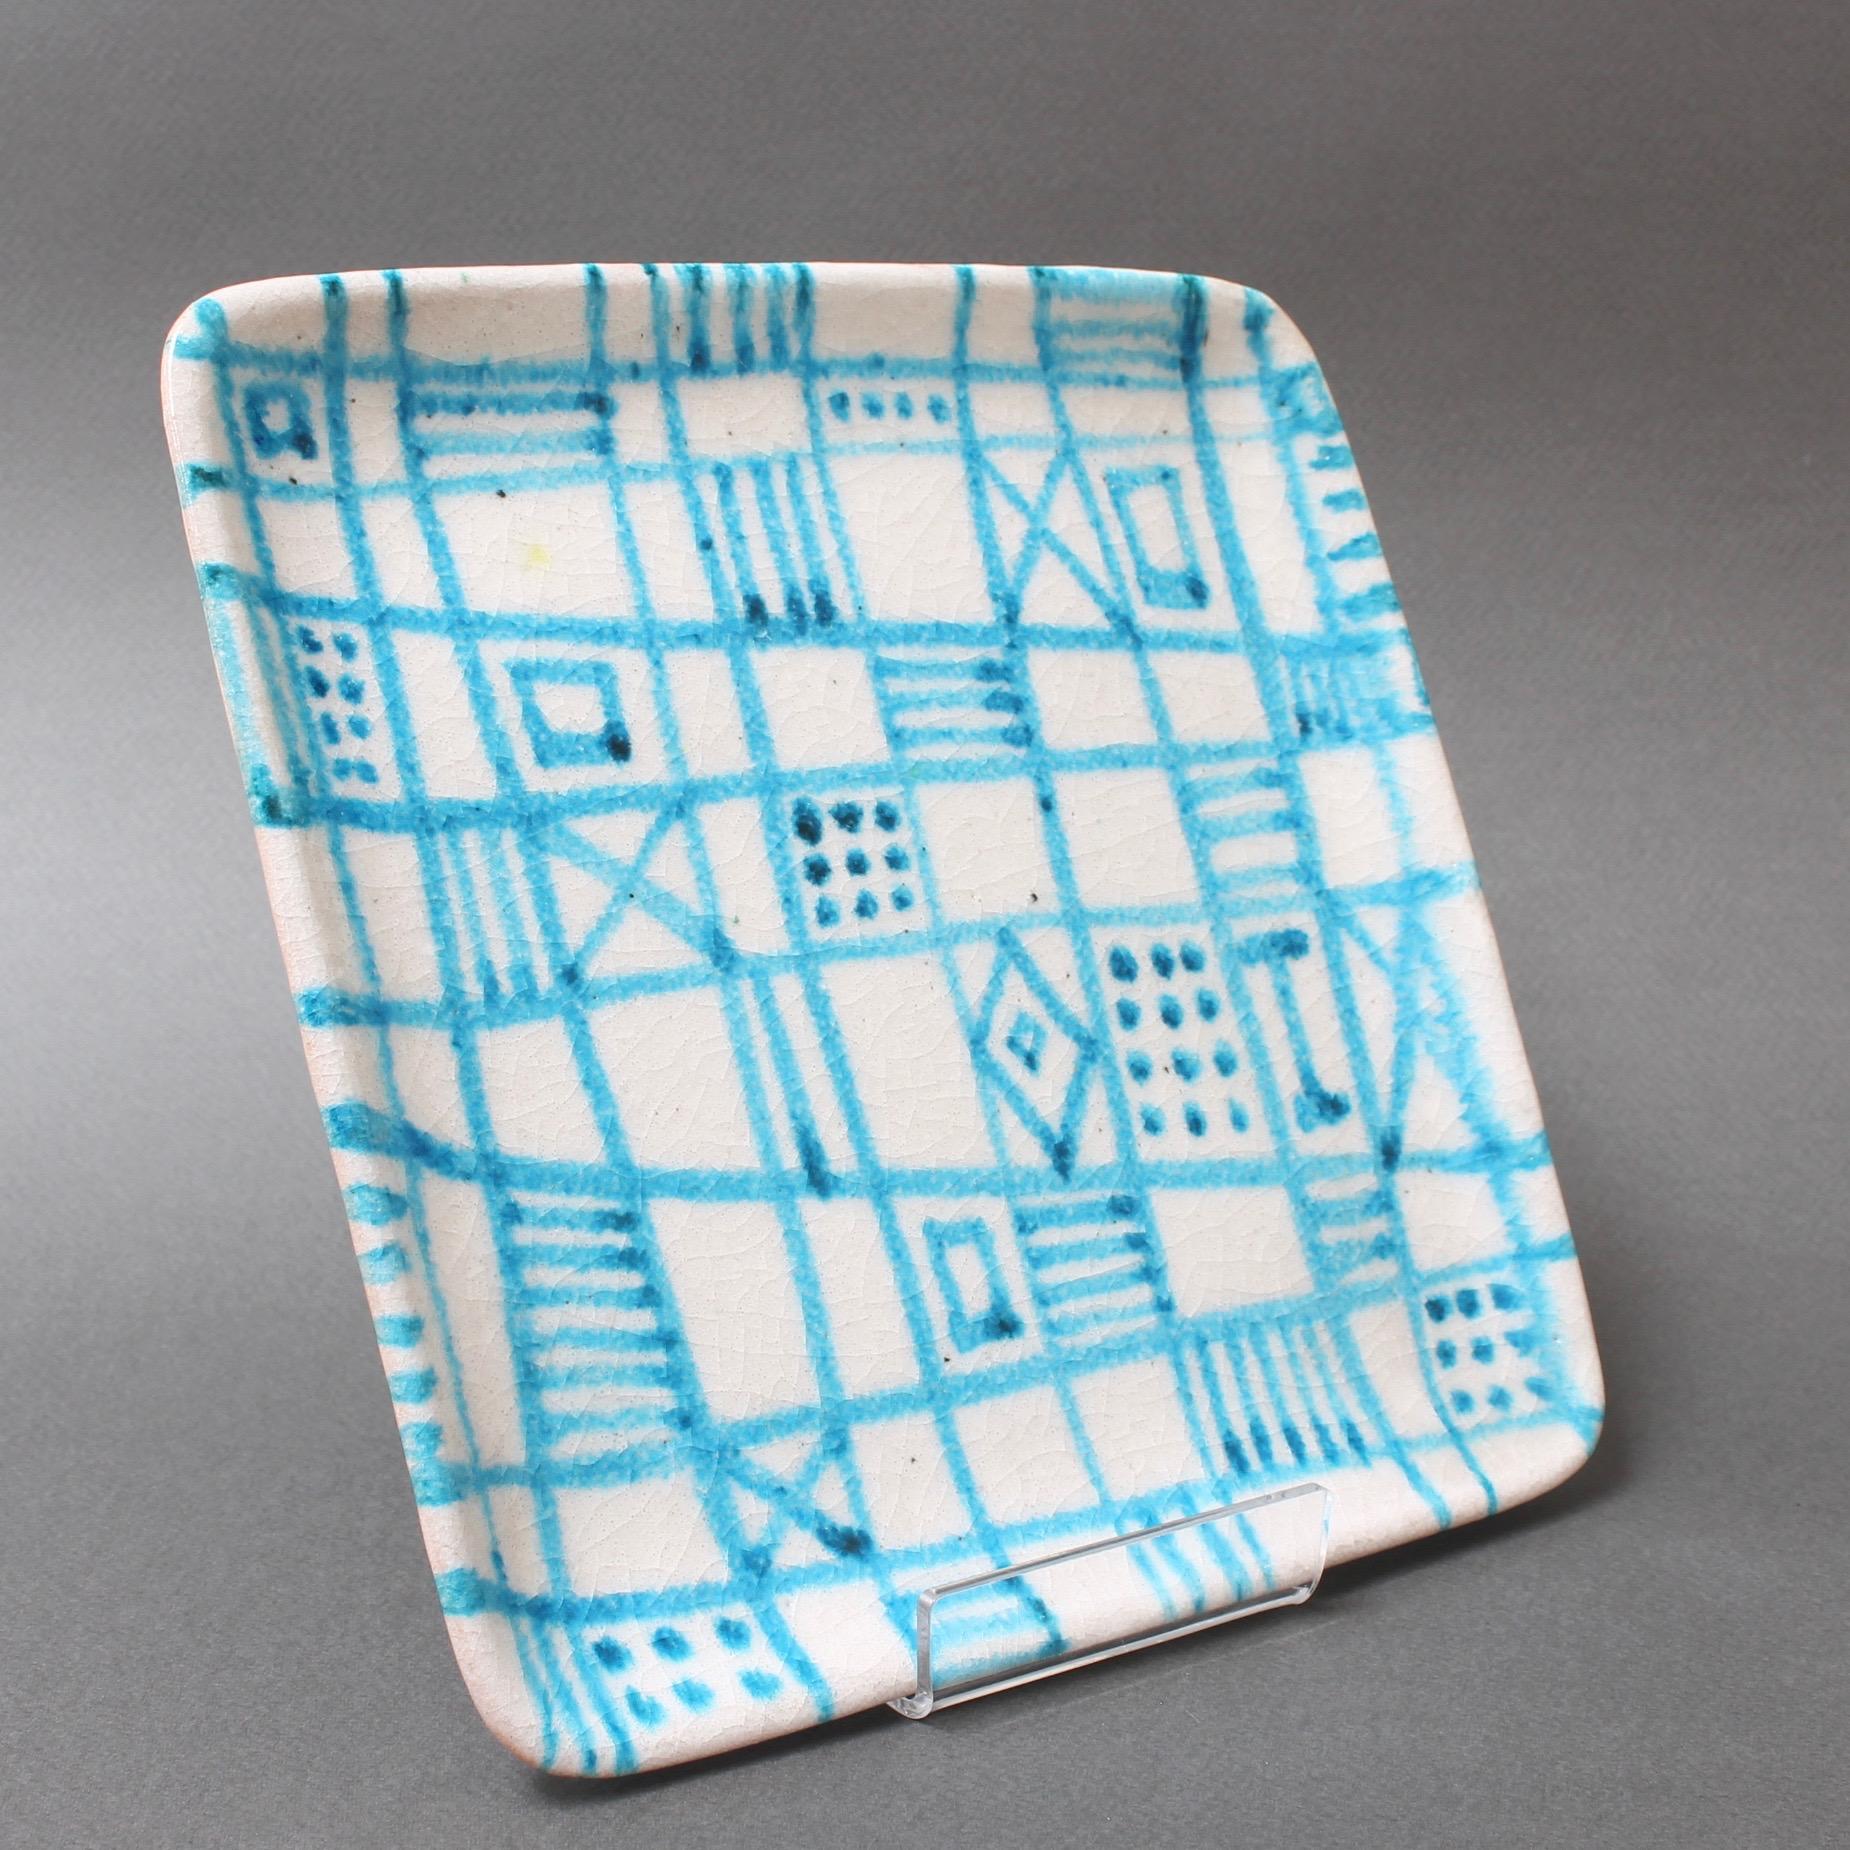 Decorative ceramic square tray / plate by Guido Gambone (circa 1950s). Hand-painted abstract decoration with geometric shapes and lines with lively powder blue over a white base. In very good vintage condition. Signed on rear: 'Gambone Italy' with